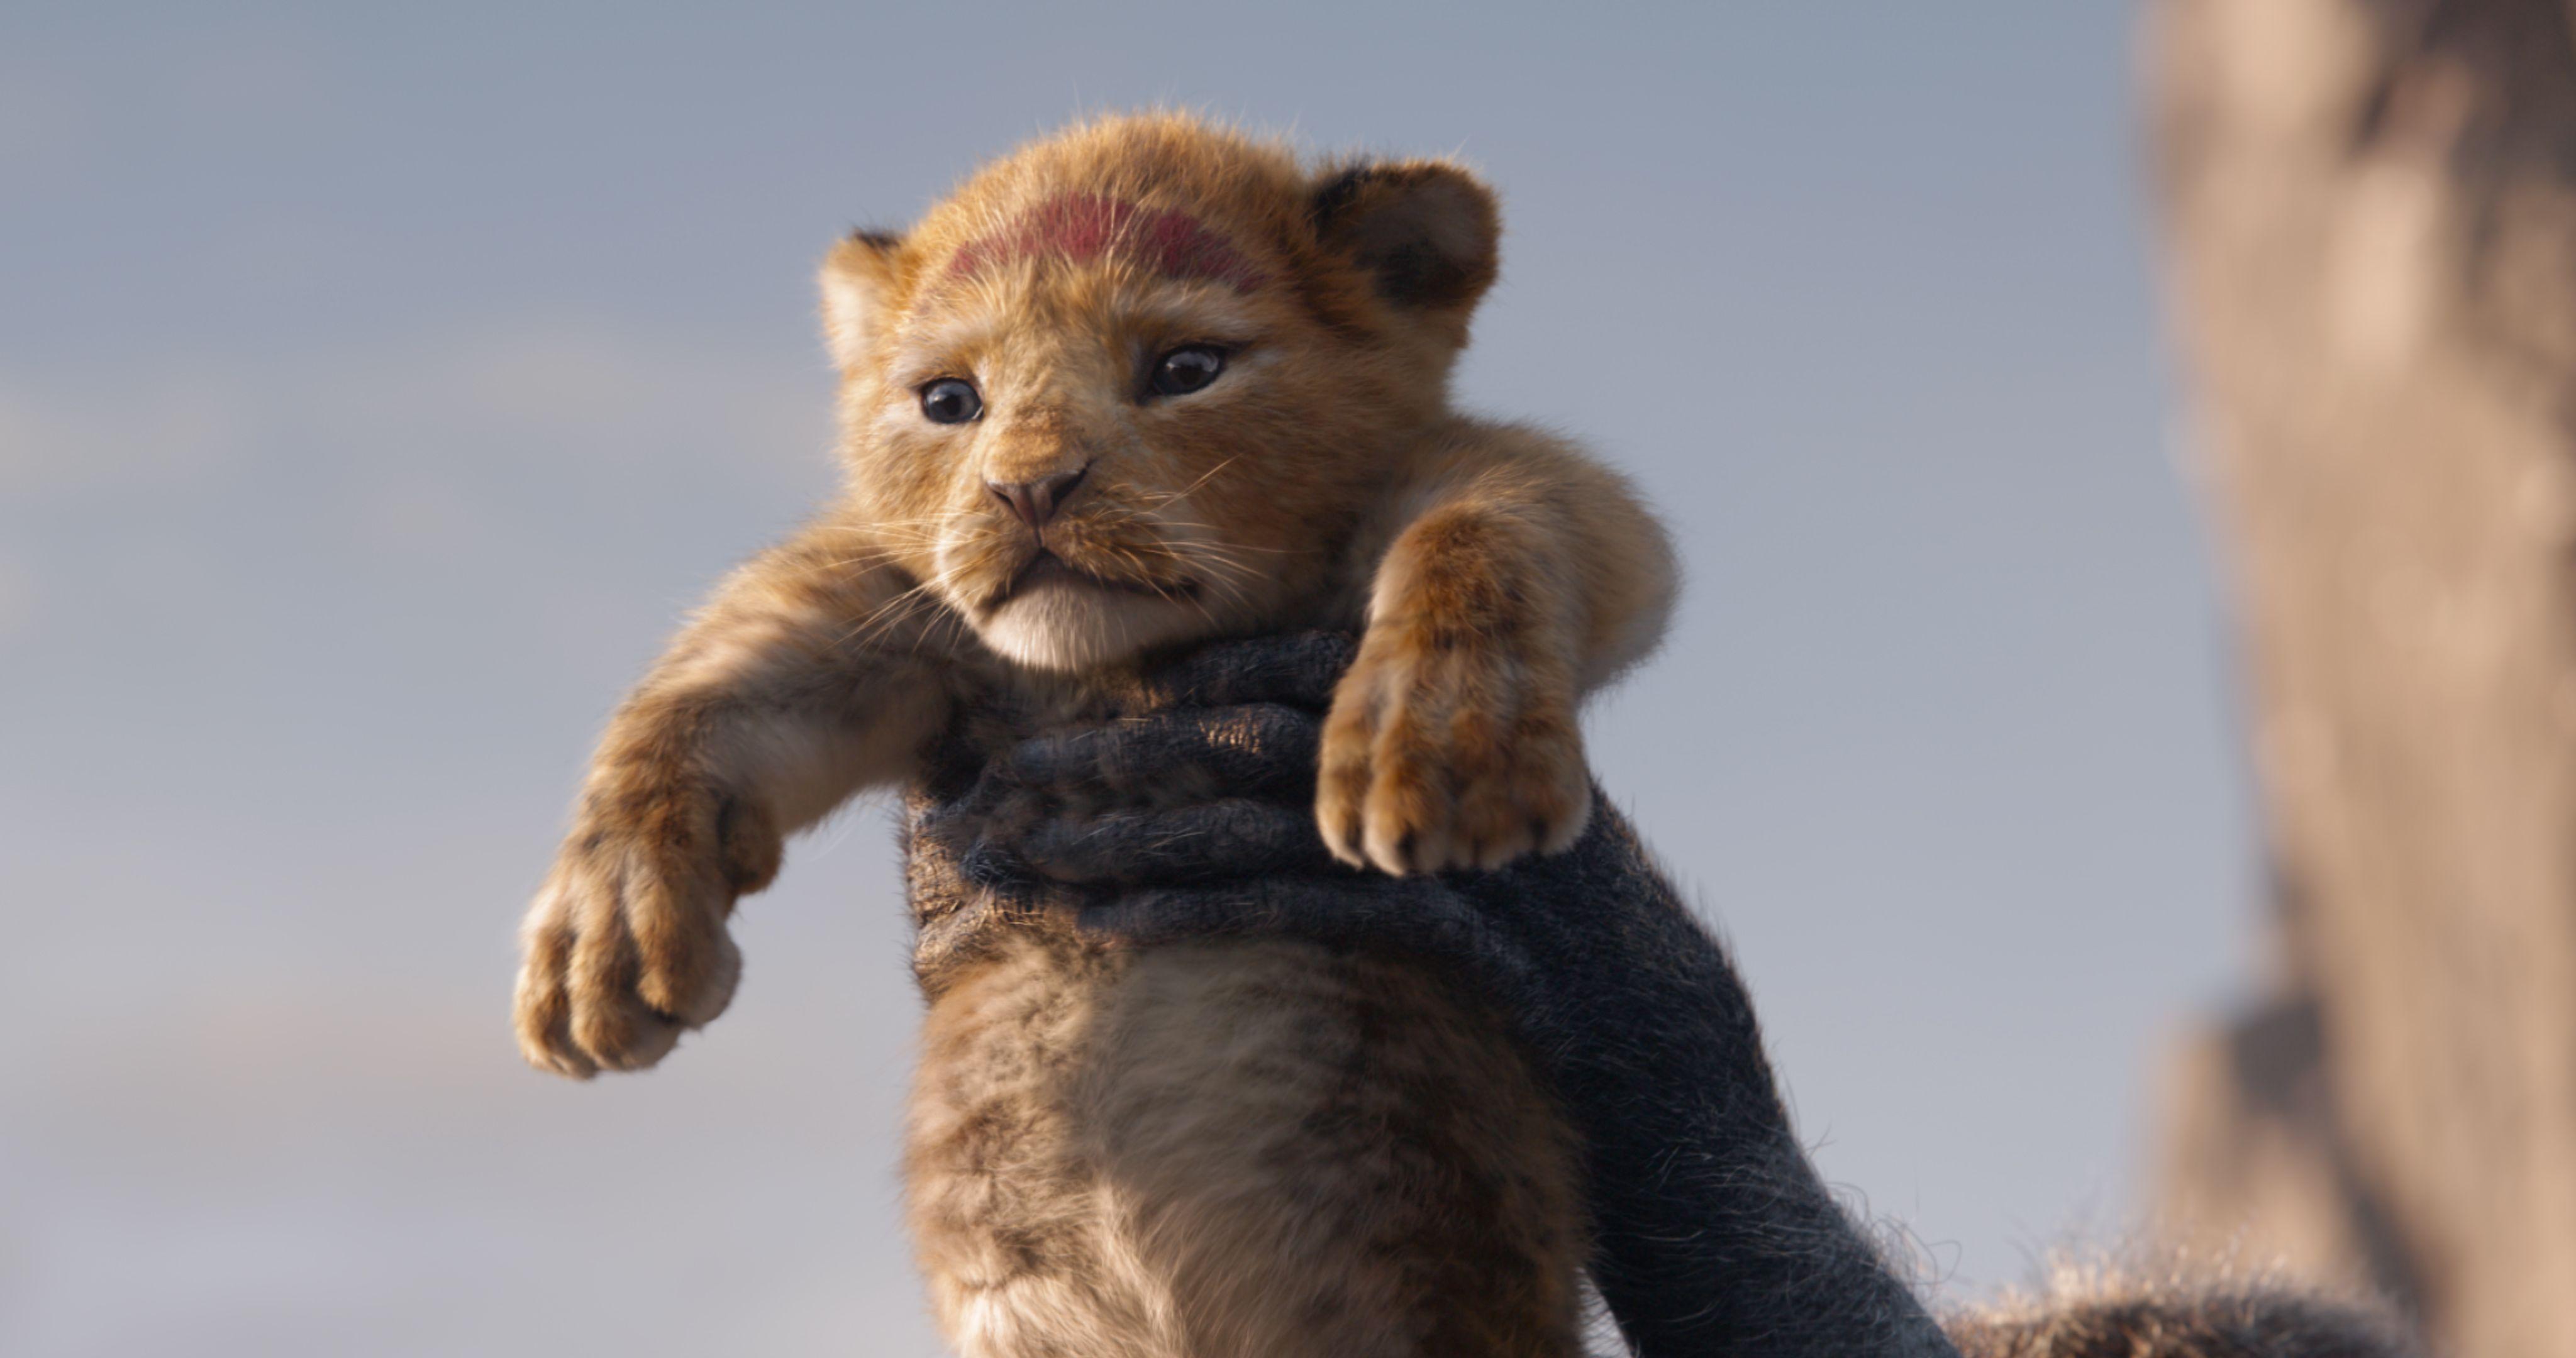 download the lion king 2019